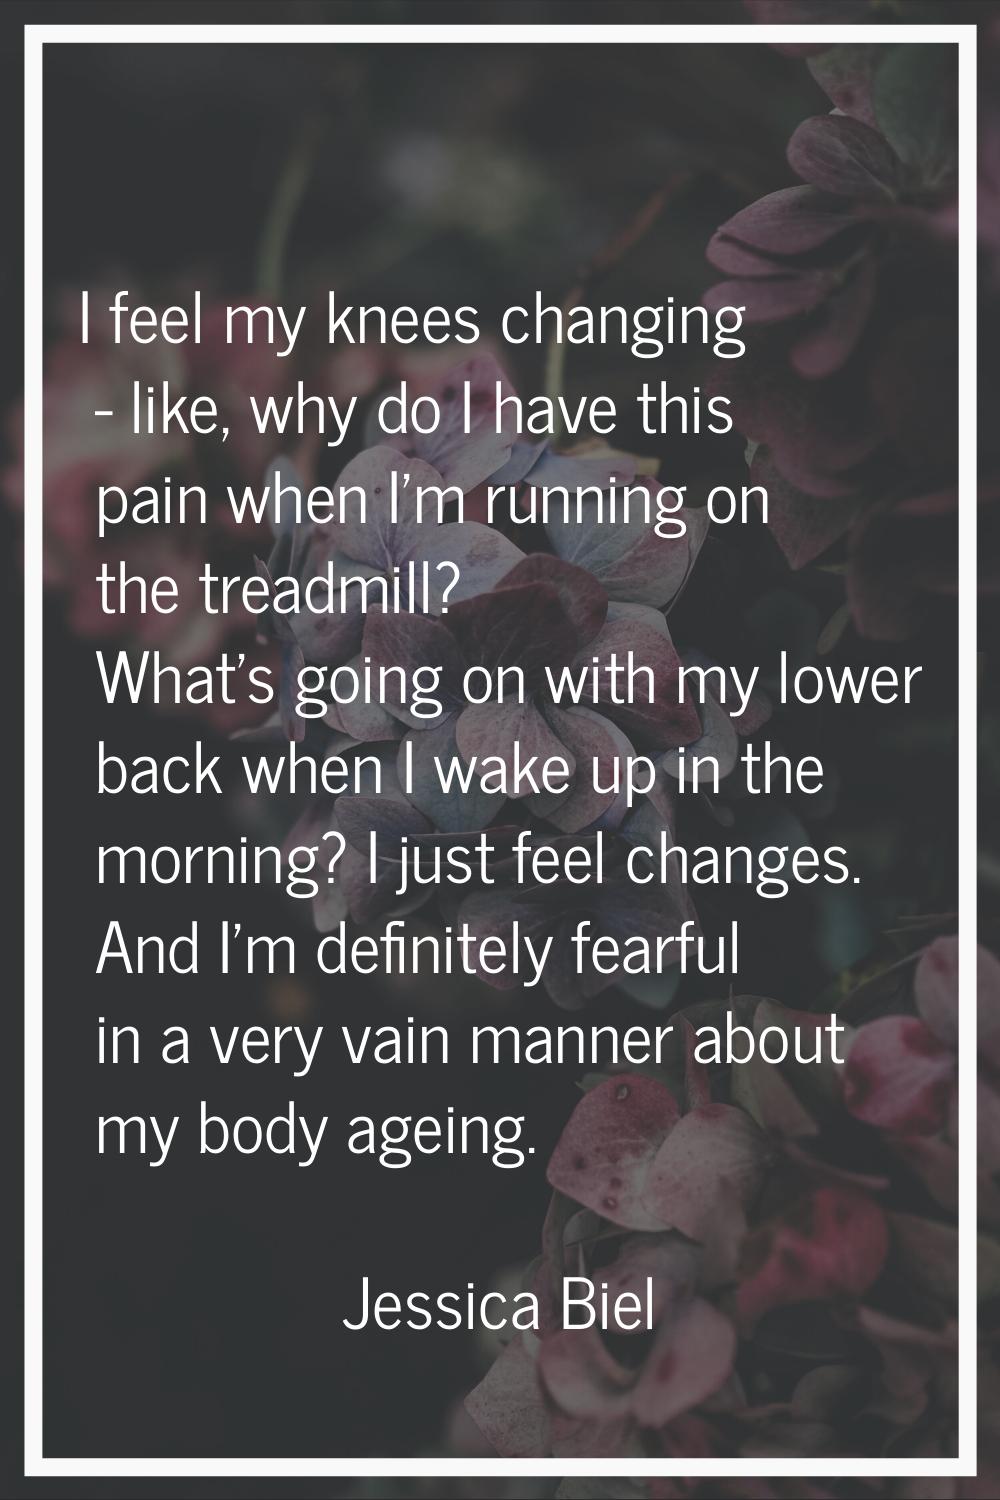 I feel my knees changing - like, why do I have this pain when I'm running on the treadmill? What's 